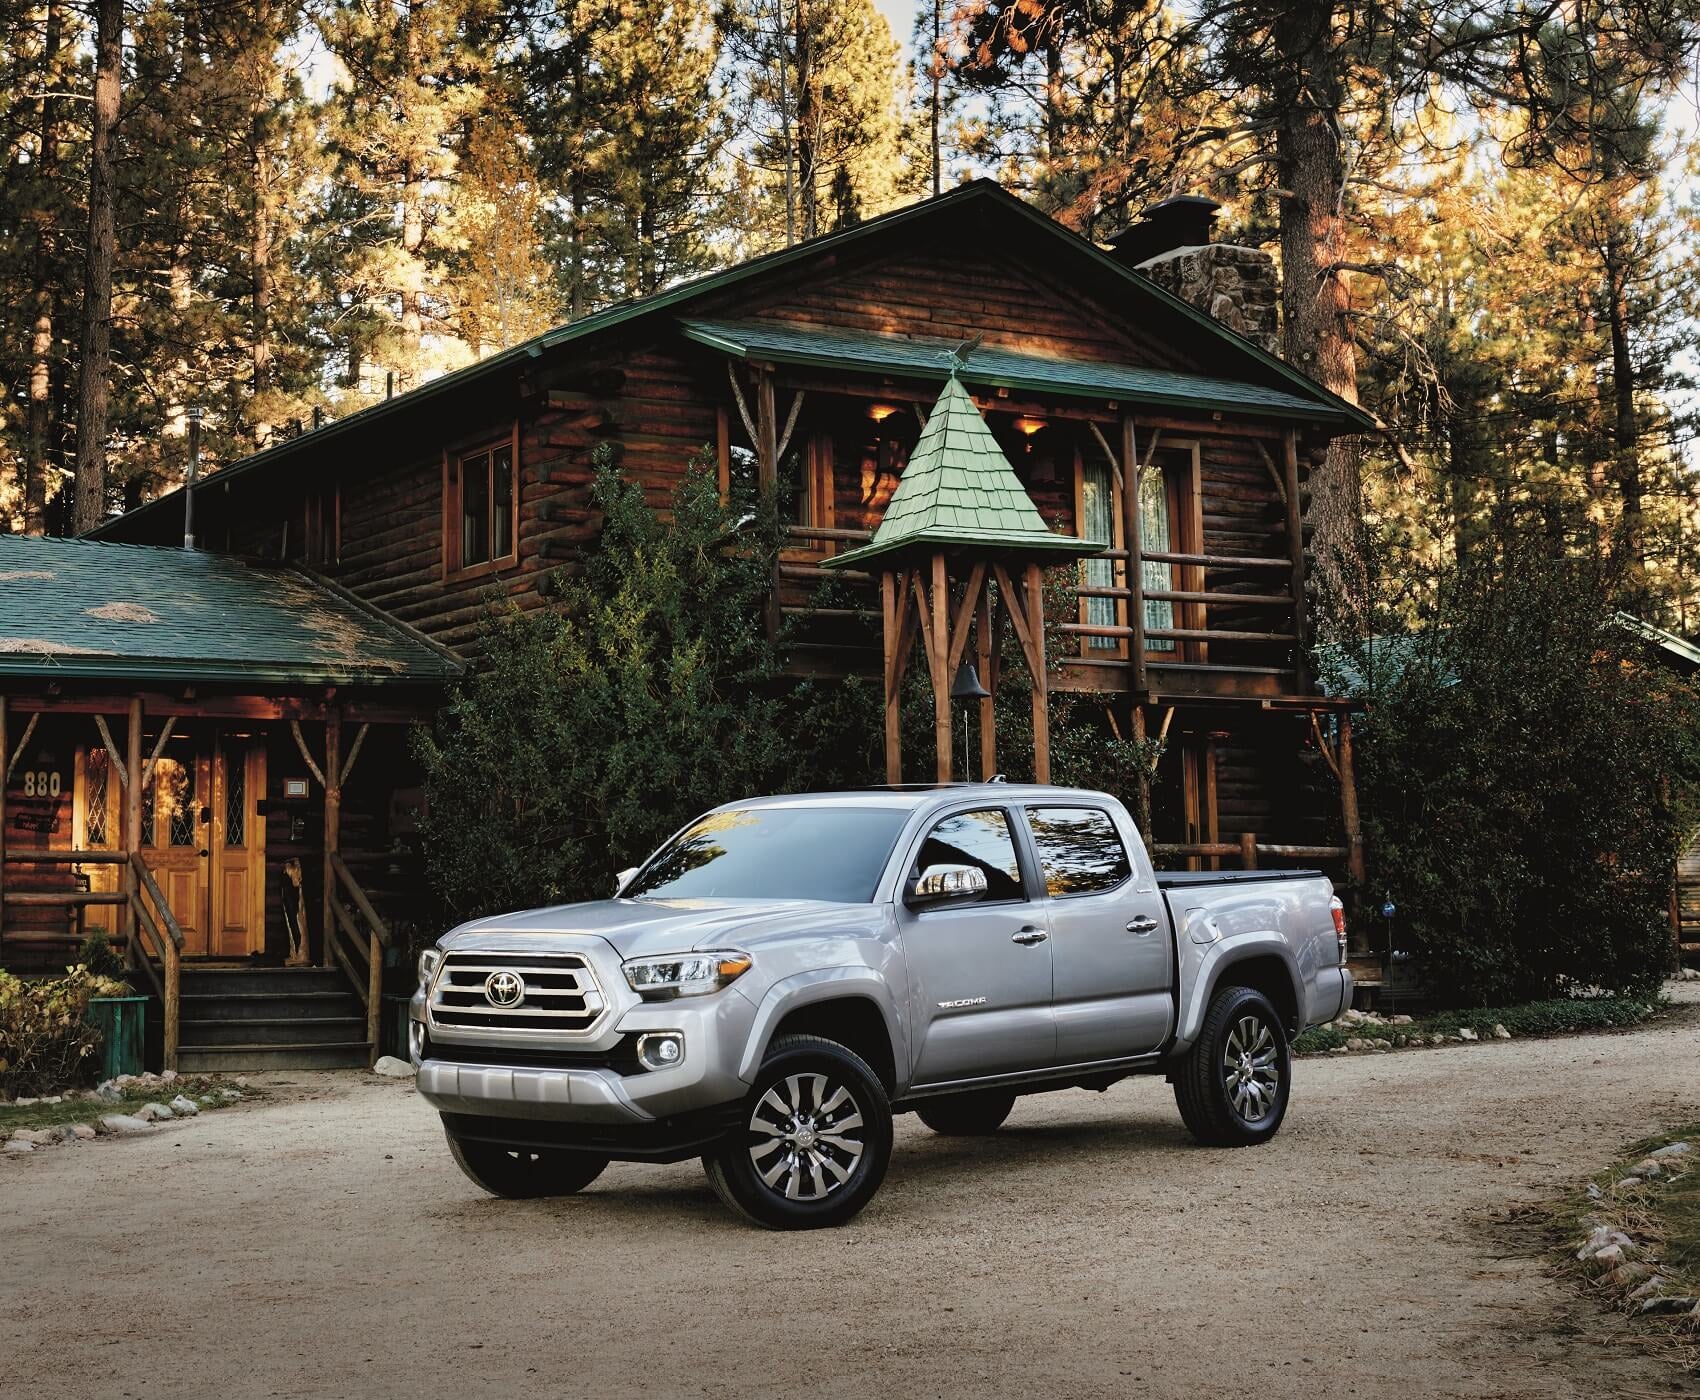 2020 TACOMA Limited near The Villages FL